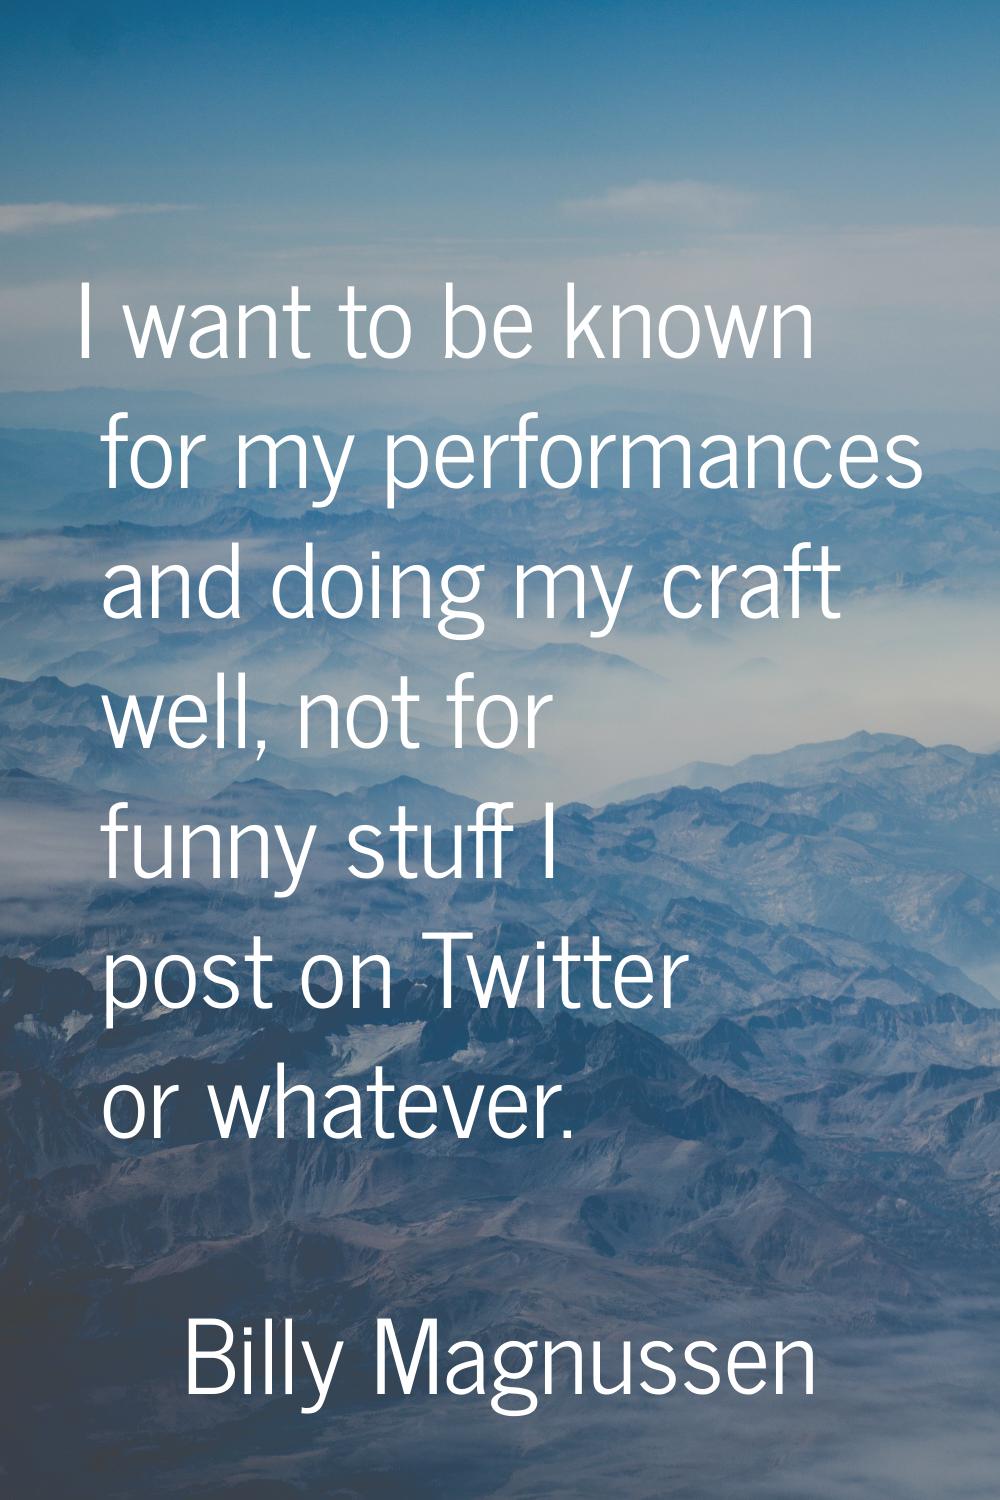 I want to be known for my performances and doing my craft well, not for funny stuff I post on Twitt